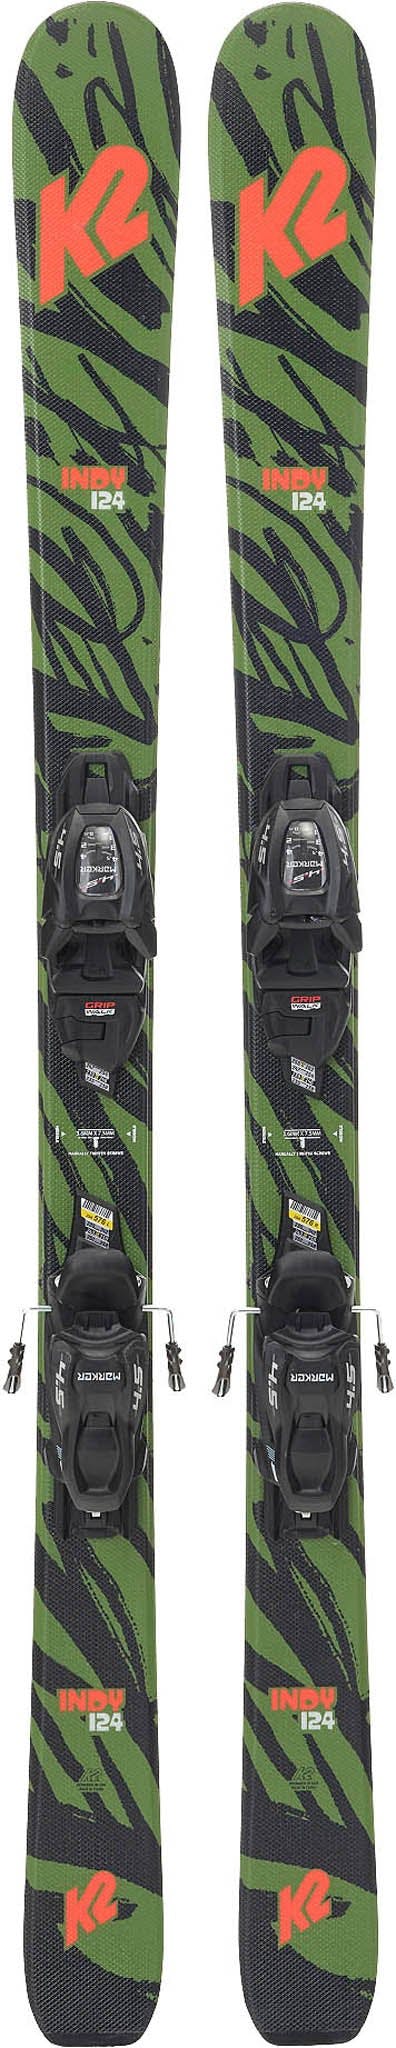 Product image for Indy 4.5 Fdt Ski - Youth